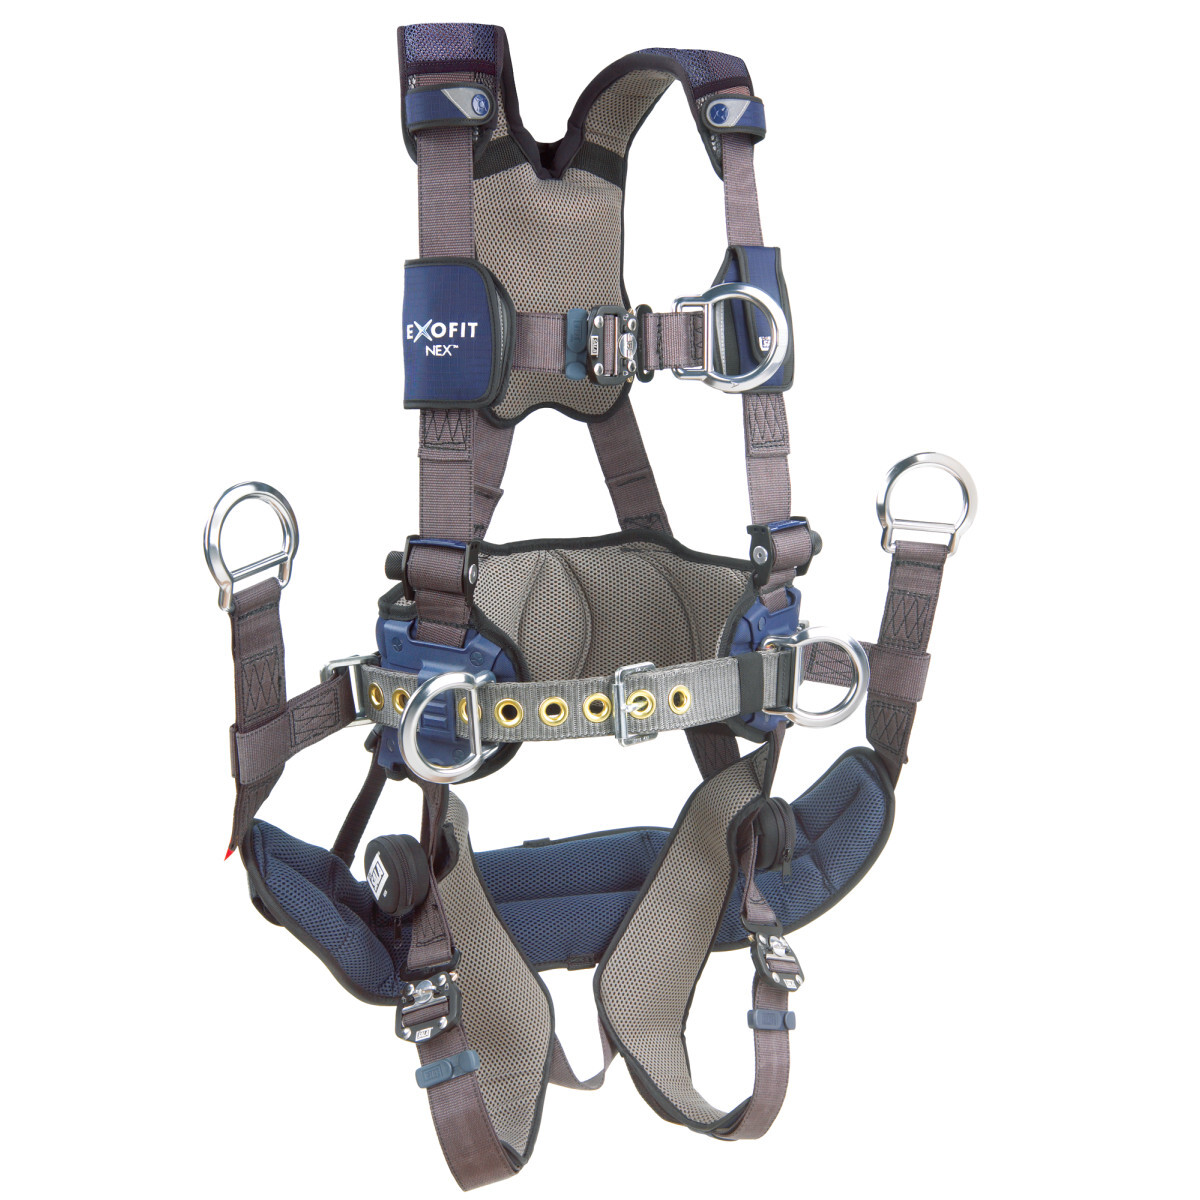 3M™ DBI-SALA® X-Large ExoFit NEX™ Full Body/Vest Style Harness With Tech-Lite™ Aluminum Back And Front D-Ring, Duo-Lok™ Quick Co